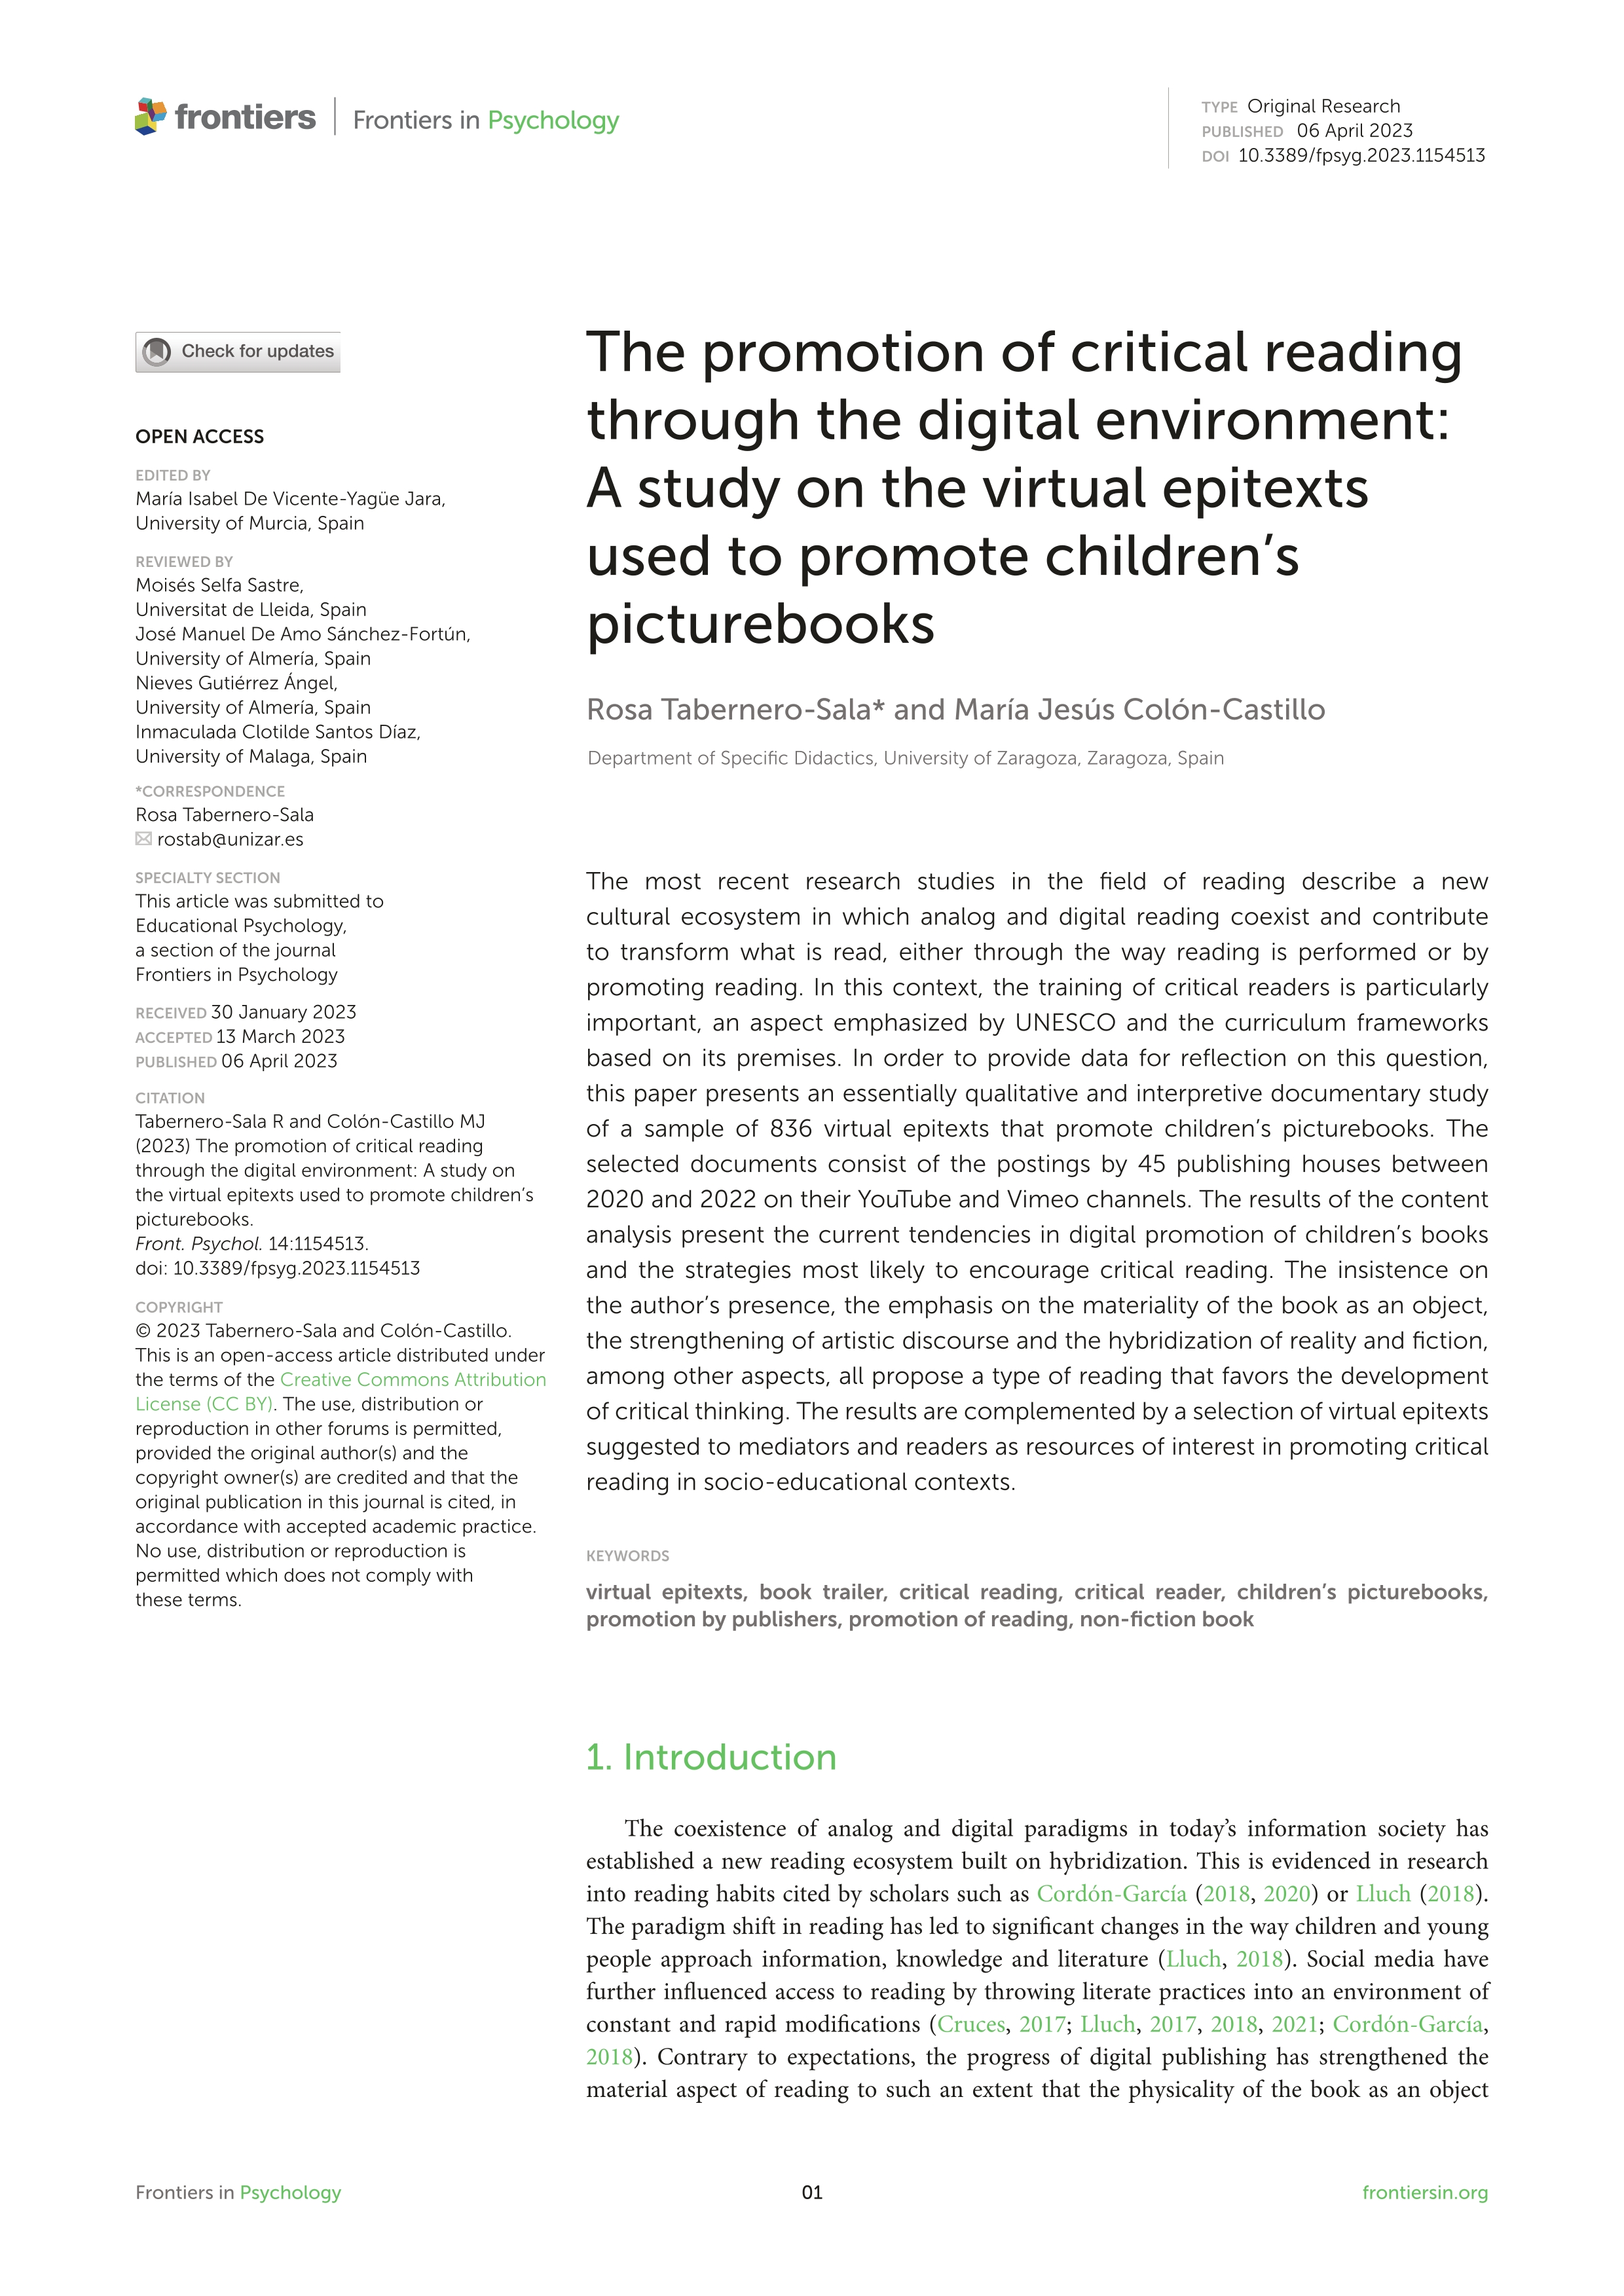 The promotion of critical reading through the digital environment: A study on the virtual epitexts used to promote children’s picturebooks